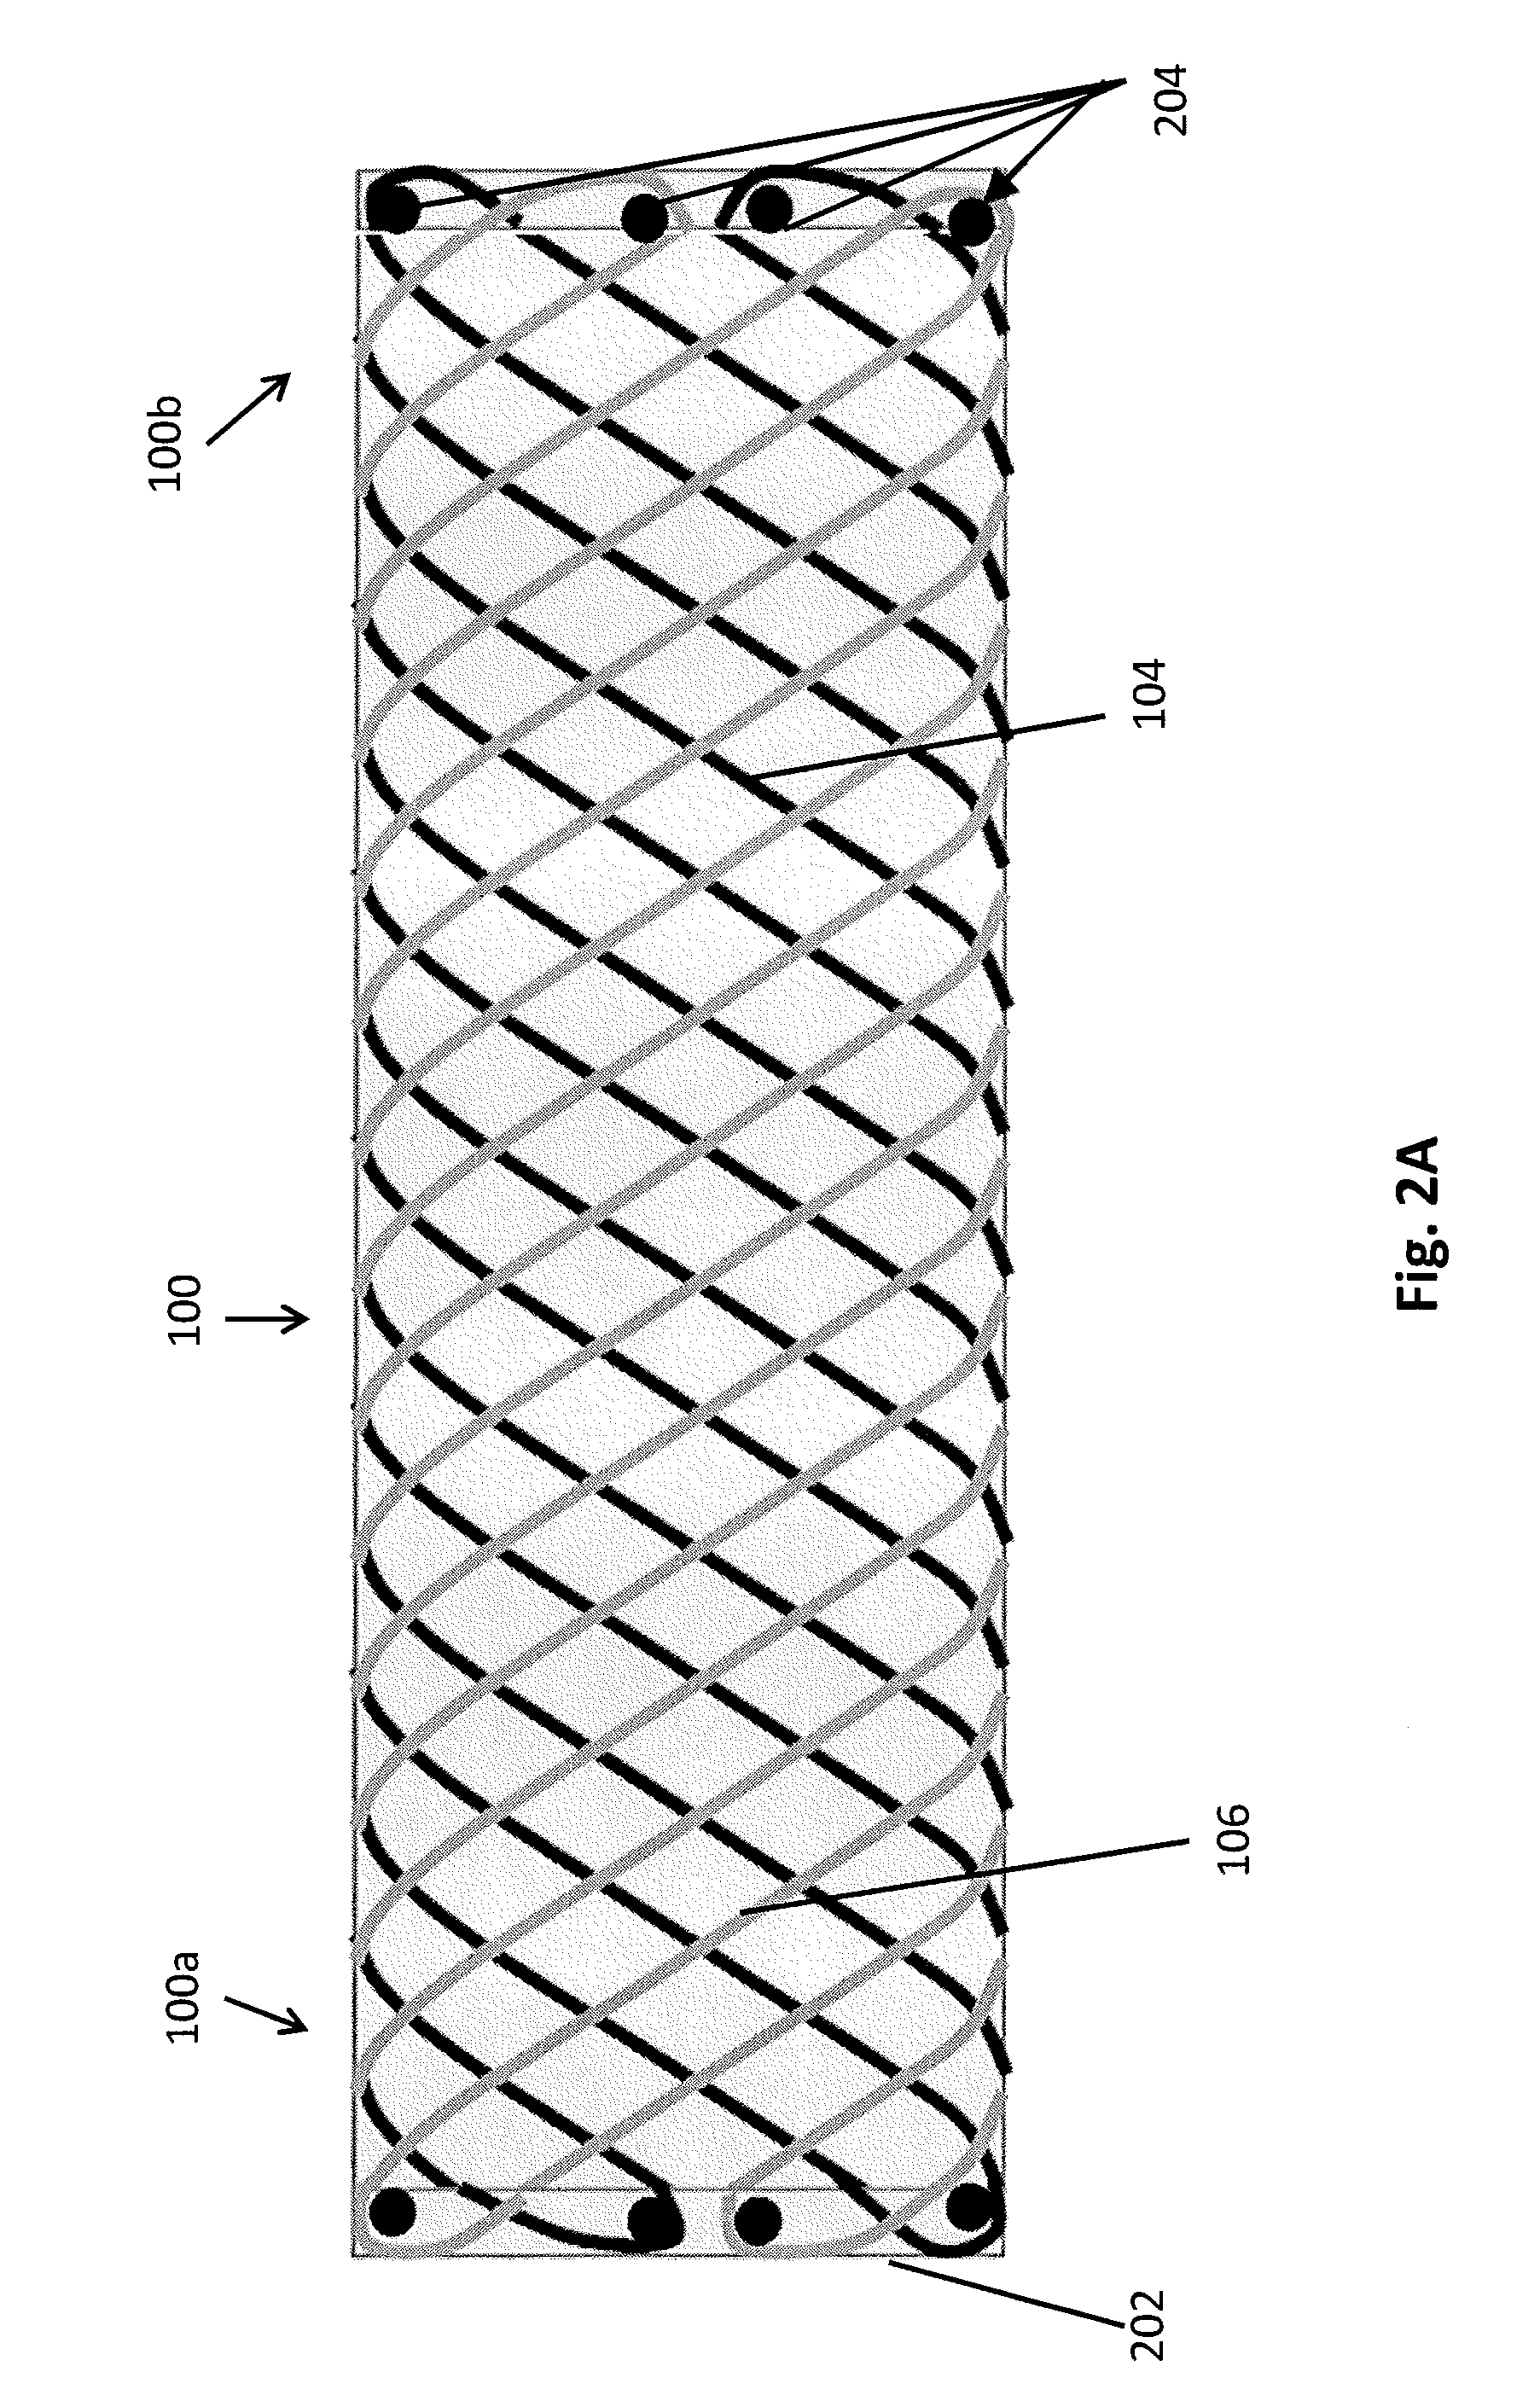 Braided helical wire stent